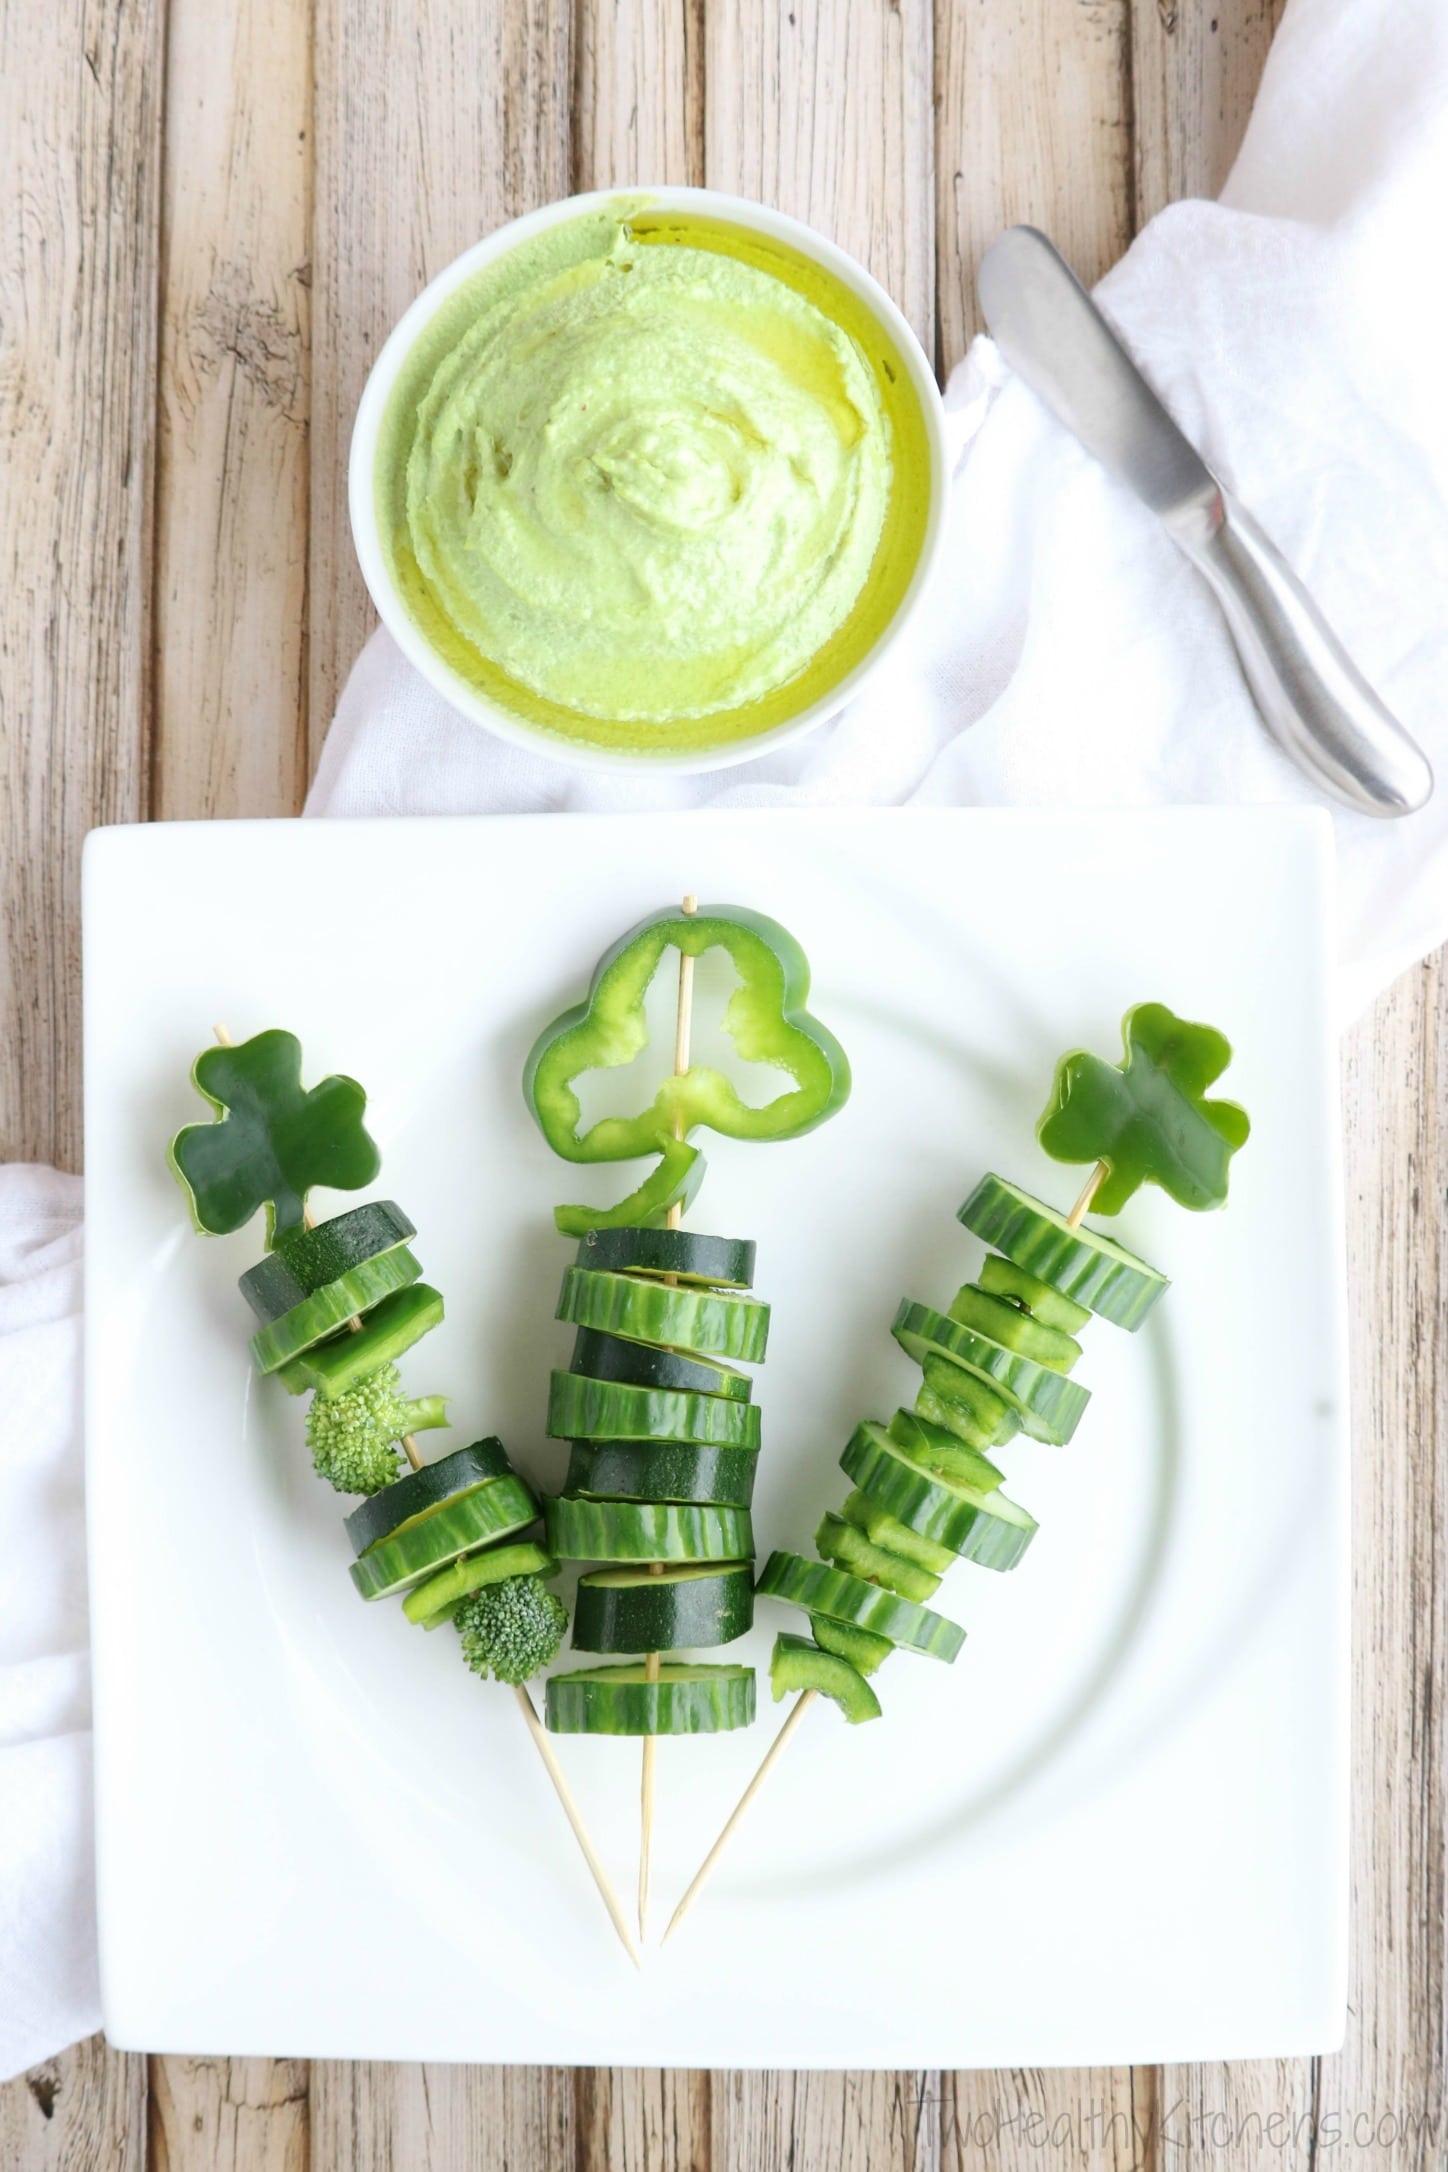 Vertical image of skewers arrayed on plate with various arrangements of green veggies with white cloth, bowl of green dip and dip spreader.